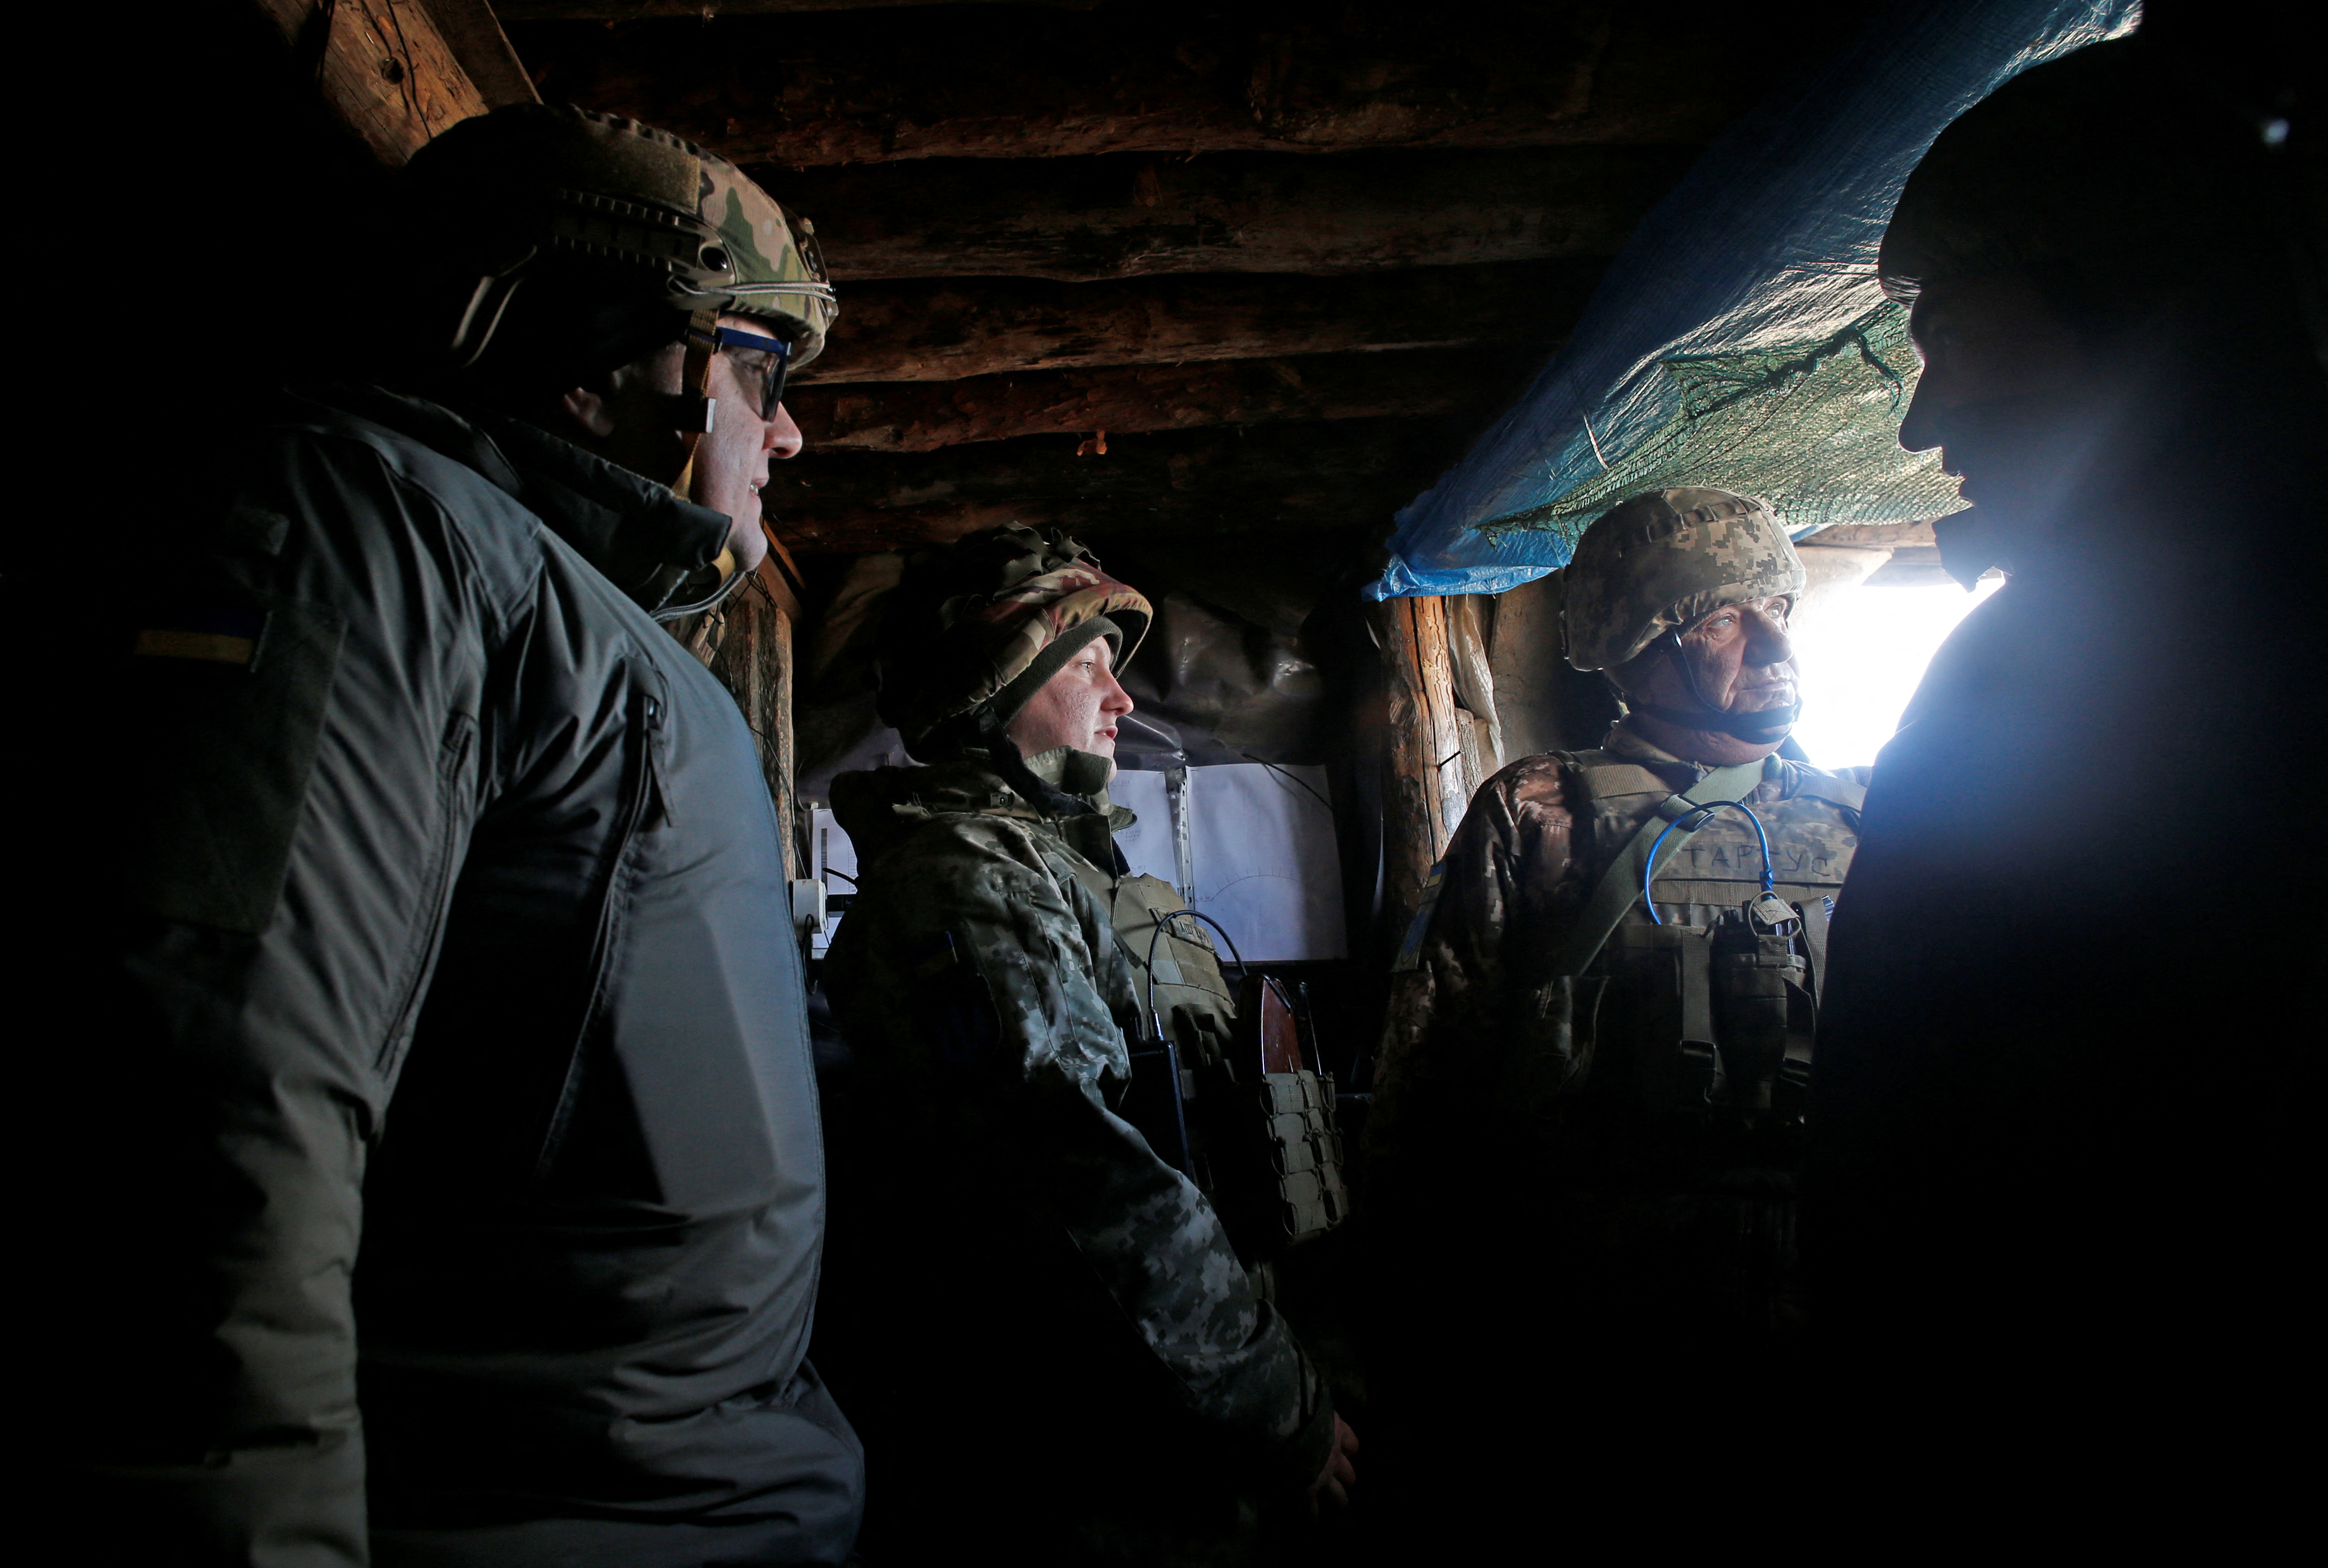 Head of the Security Service of Ukraine (SBU) Bakanov and Secretary of Ukraine's National Security and Defence Council Danilov visit combat positions in the Donetsk region